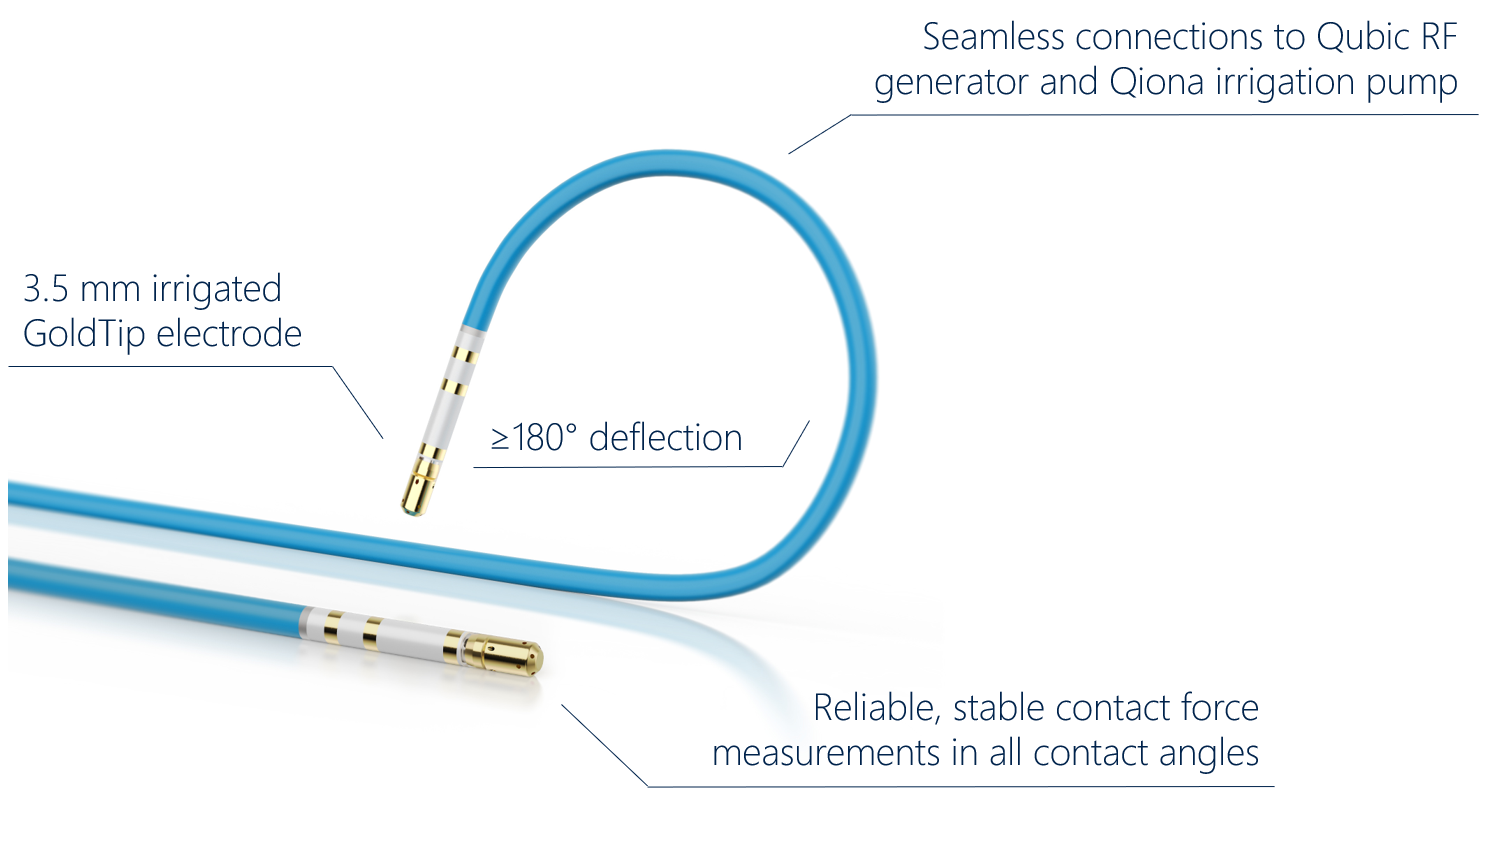 Contact Force Ablation Biotronik